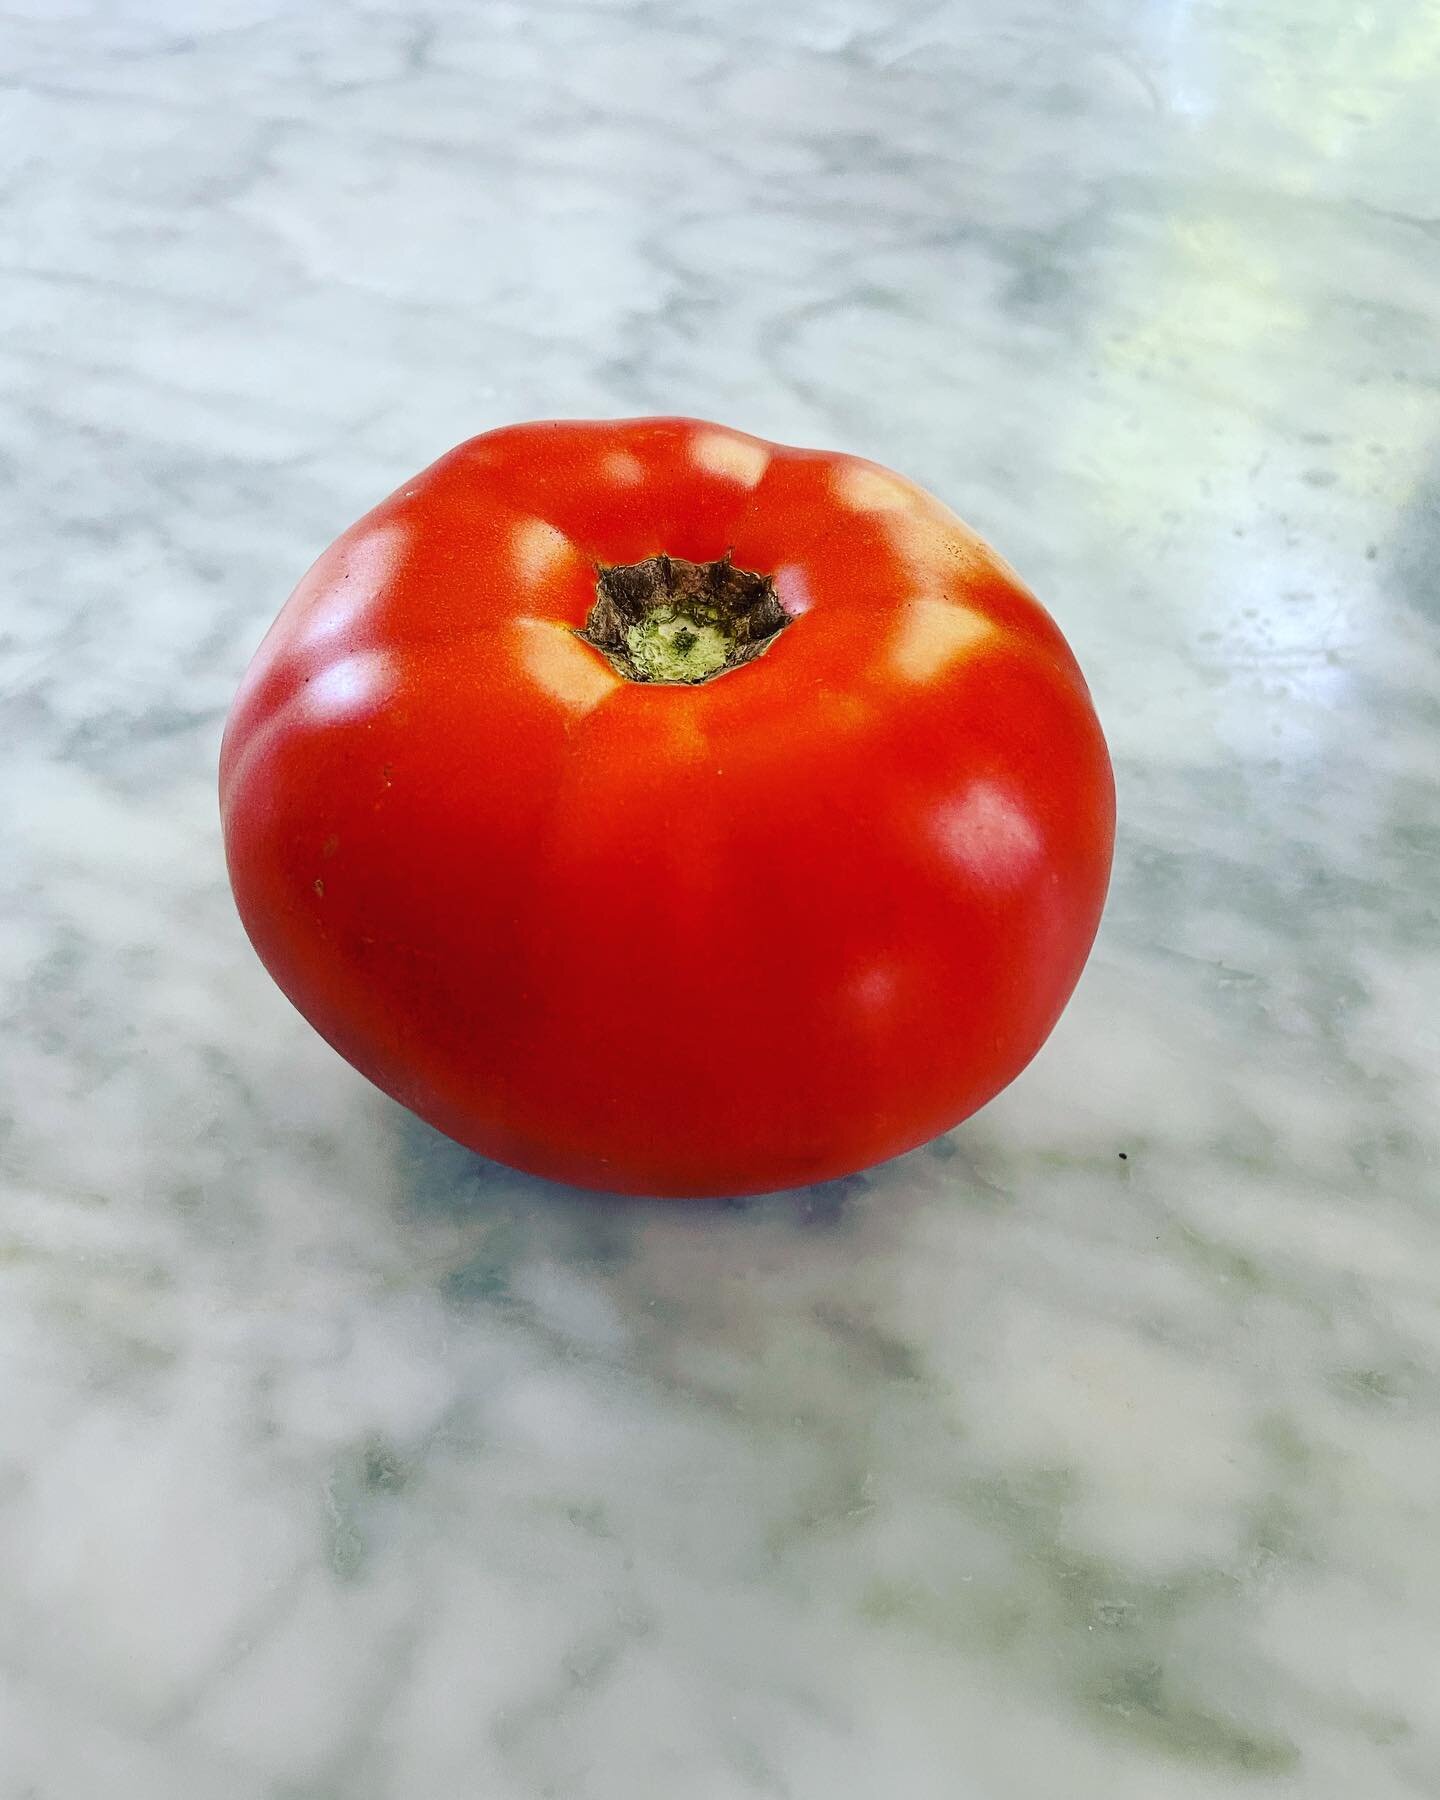 I bought heirloom plants but the first of the crop looks like a grocery store variety.  Come see me and have a tomato sandwich. www.airbnb.com/p/Beekmanmansion  #heirloomtomatoes #homegrowntomatoes americancountryhouse #cottagecore #upstateny #bedand